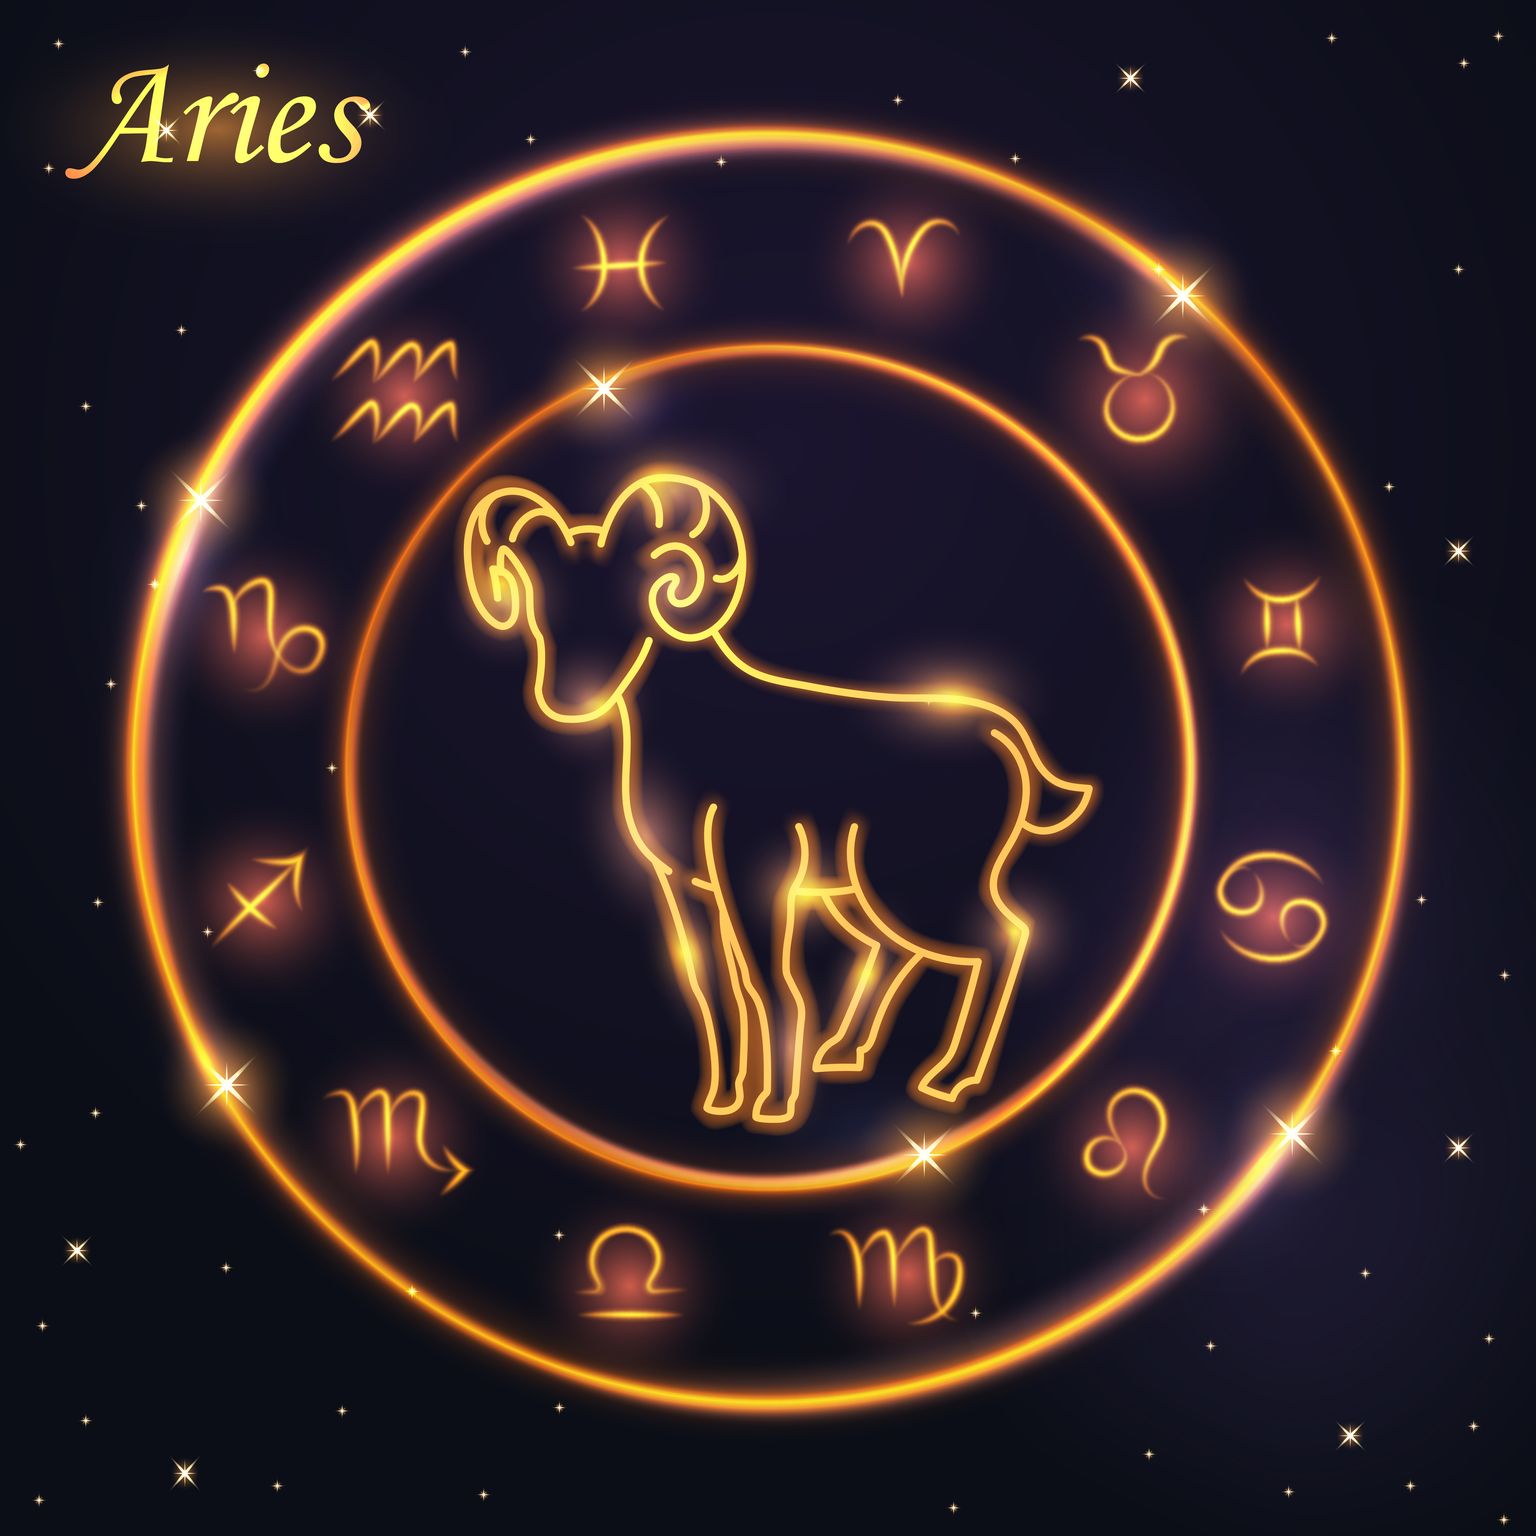 An image of an Aries zodiac sign. | Source: Getty Images